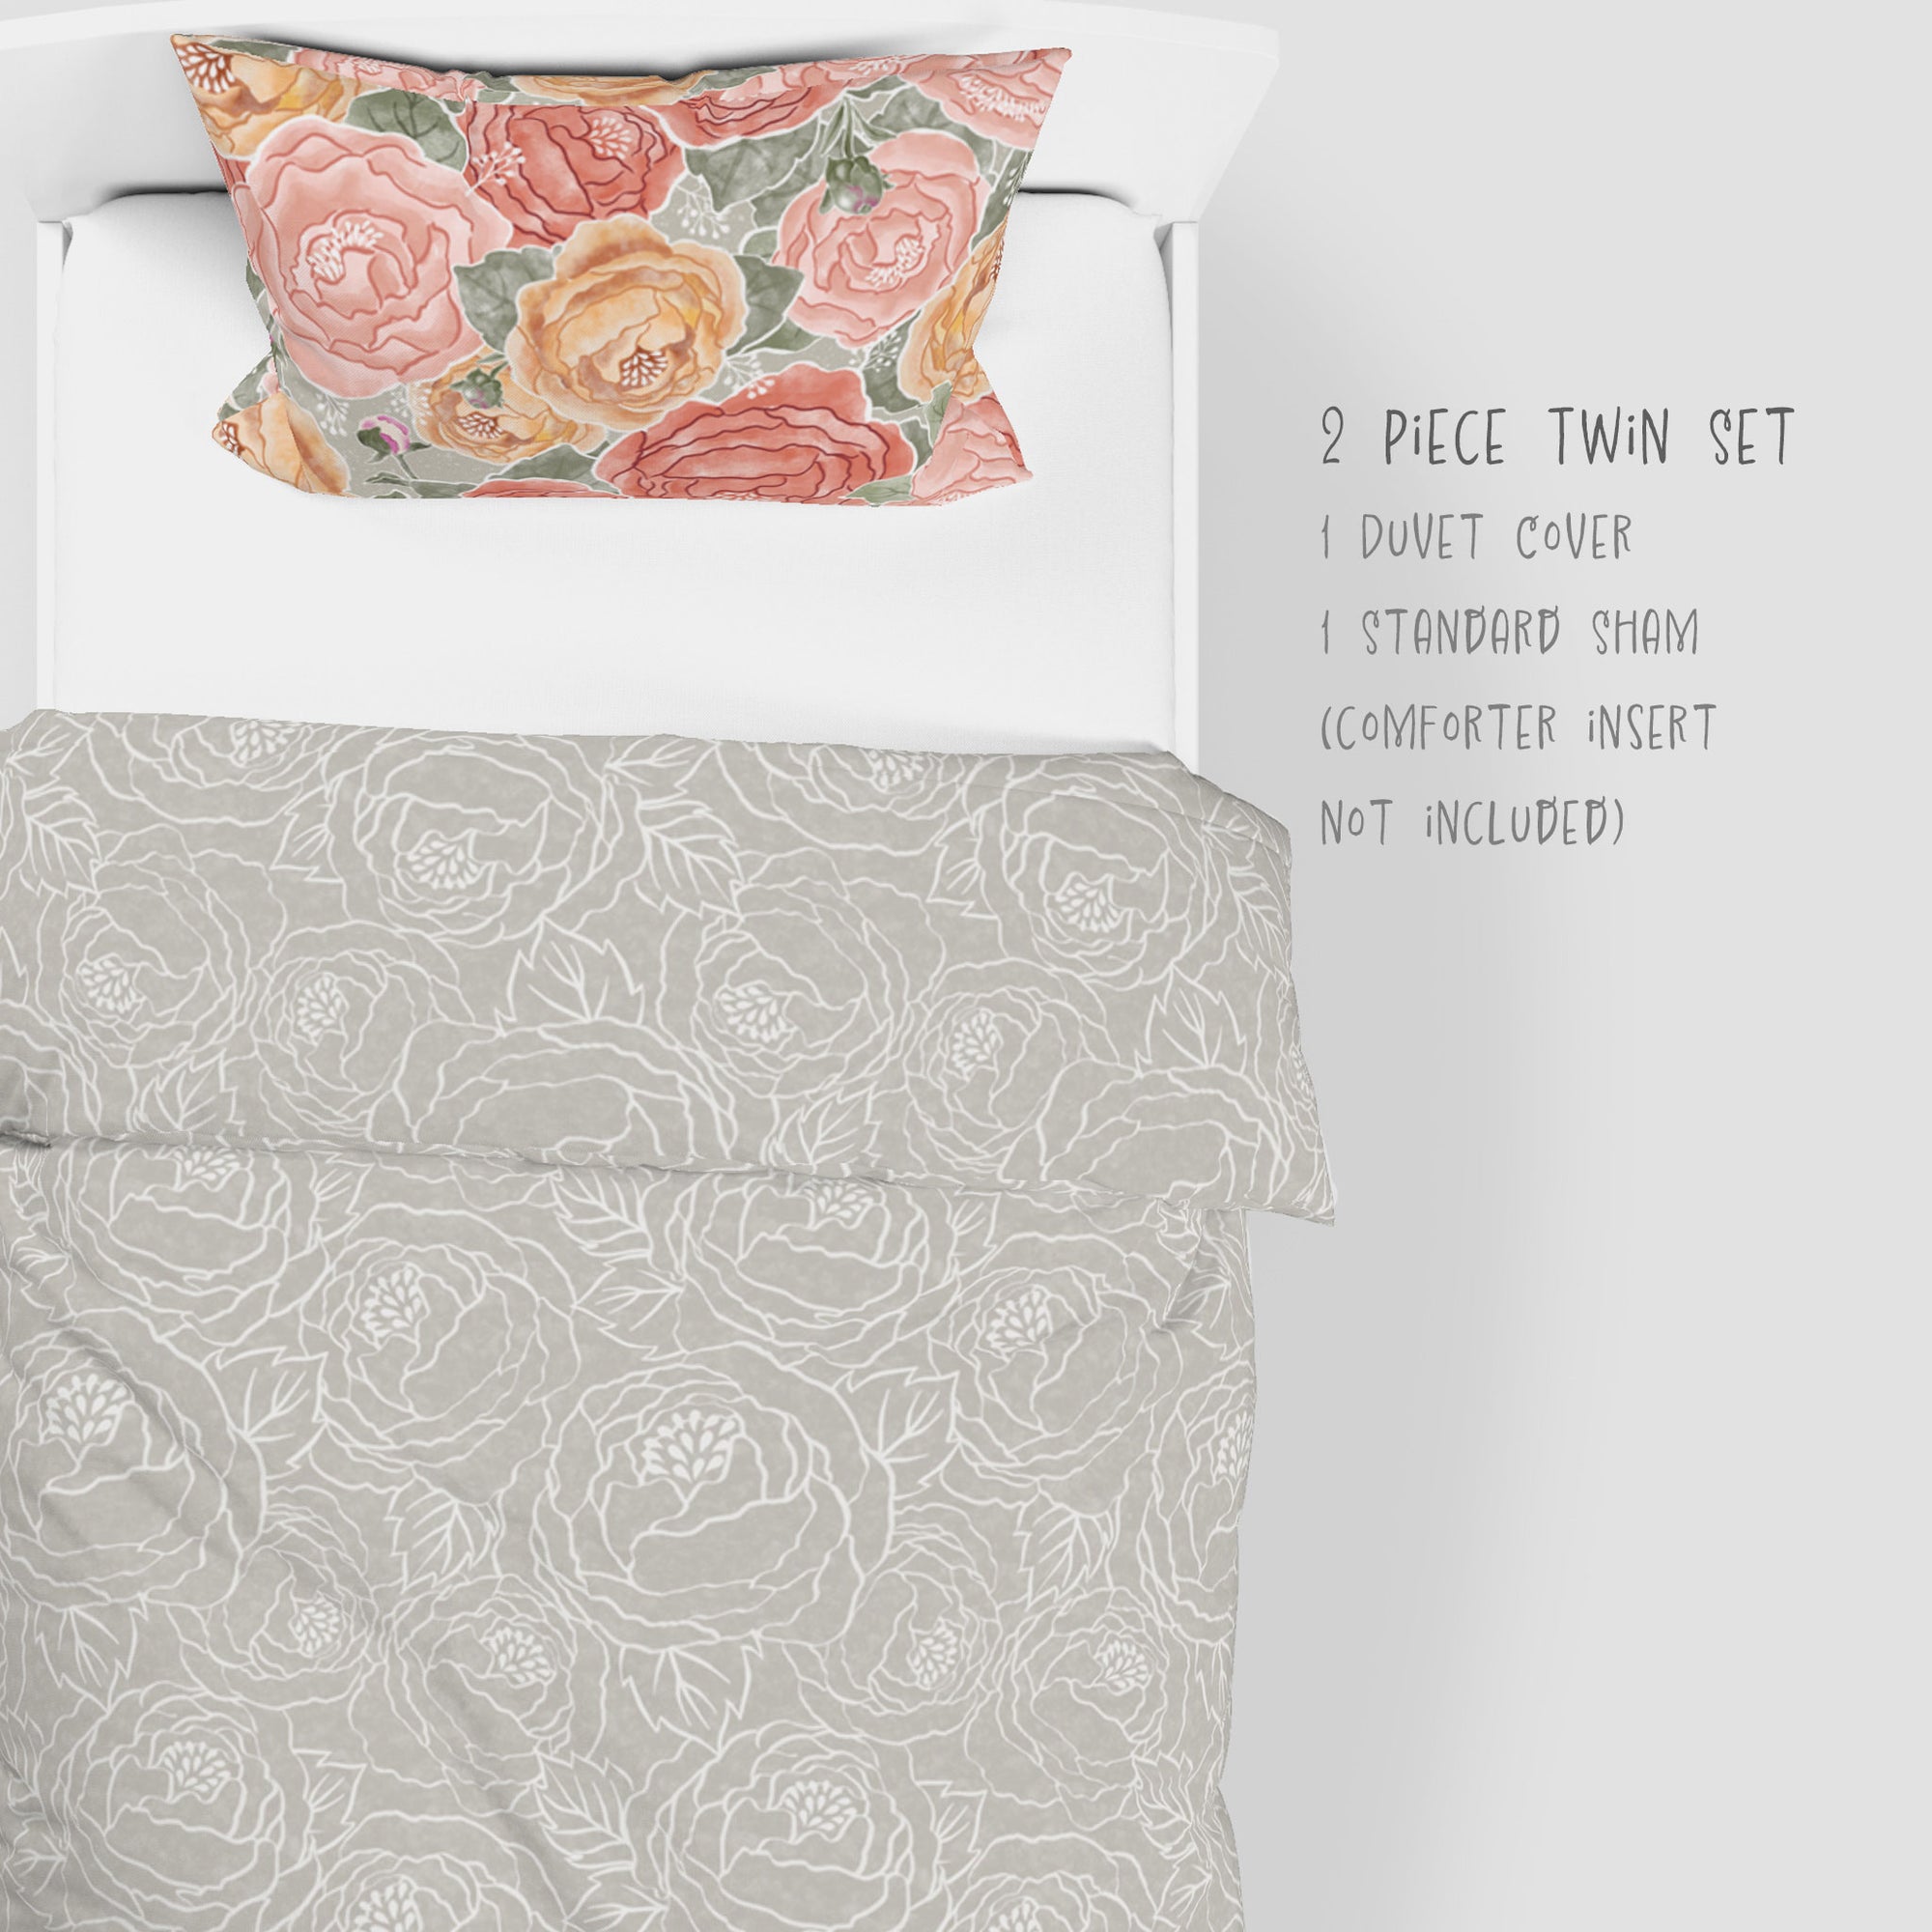  2 Piece Set for Twin sizes - Pretty In Peony Line on Sage comes with Duvet cover and one Sham